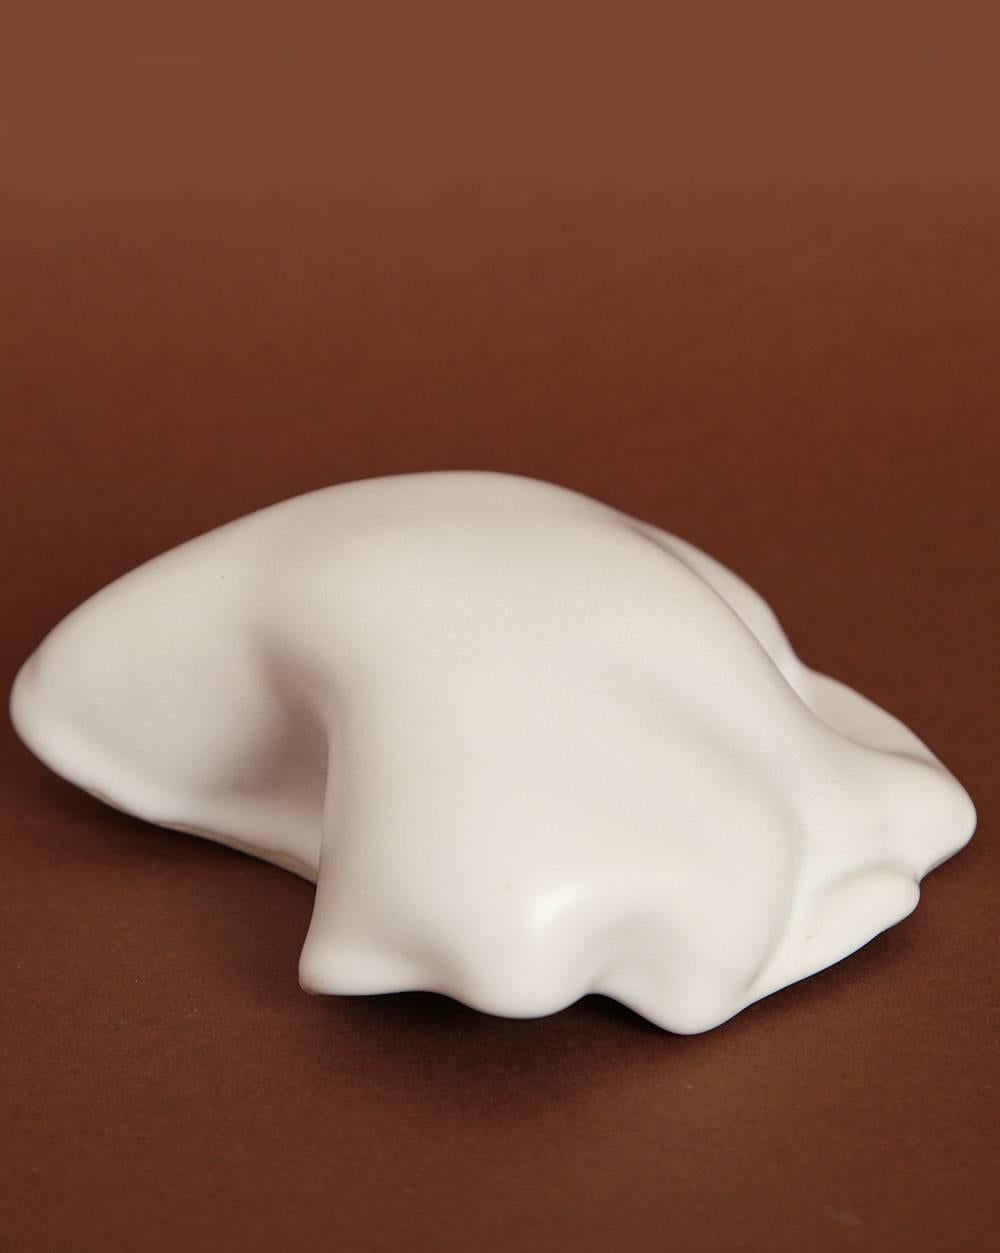 Sandra Zeenni 
“Nobe Blanche Otra”, 2014. 
Small earthenware object with a smooth white glaze over an ivory clay body. These pieces are meant to be touched and feel beautiful in your hand. 
Signed SaZe 
Measures: 2